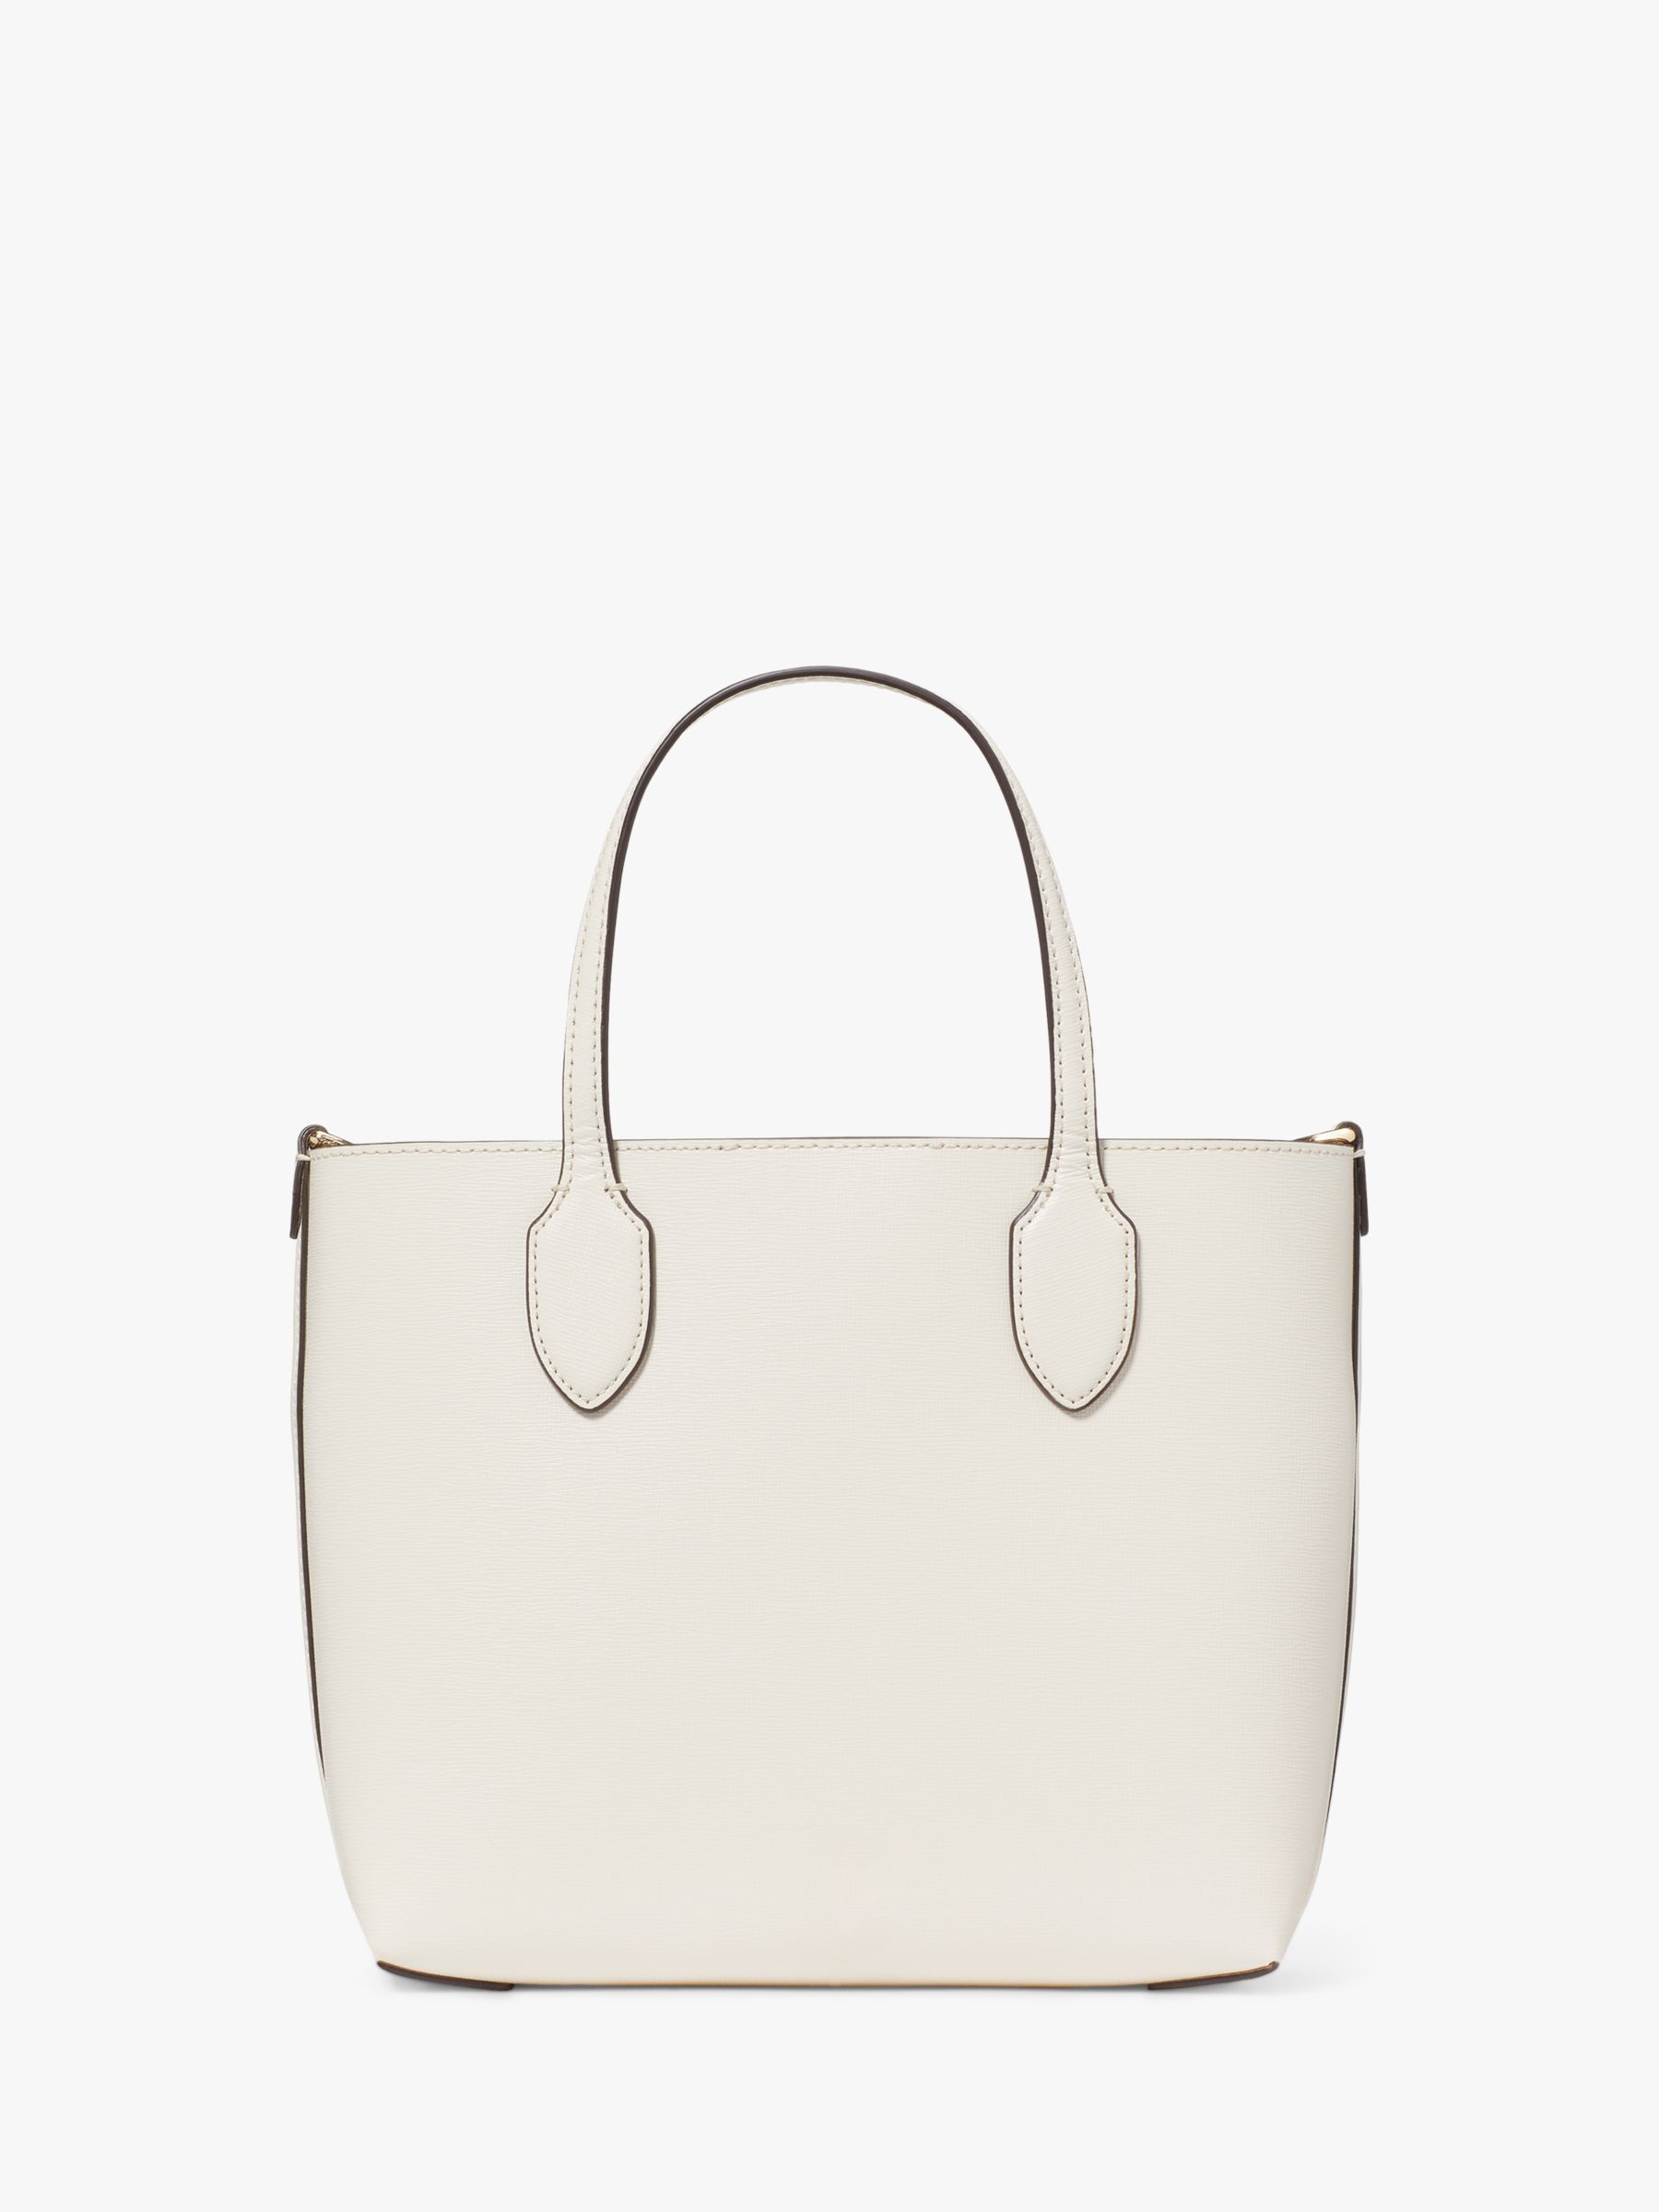 Buy kate spade new york Bleecker Small Leather Tote Bag Online at johnlewis.com